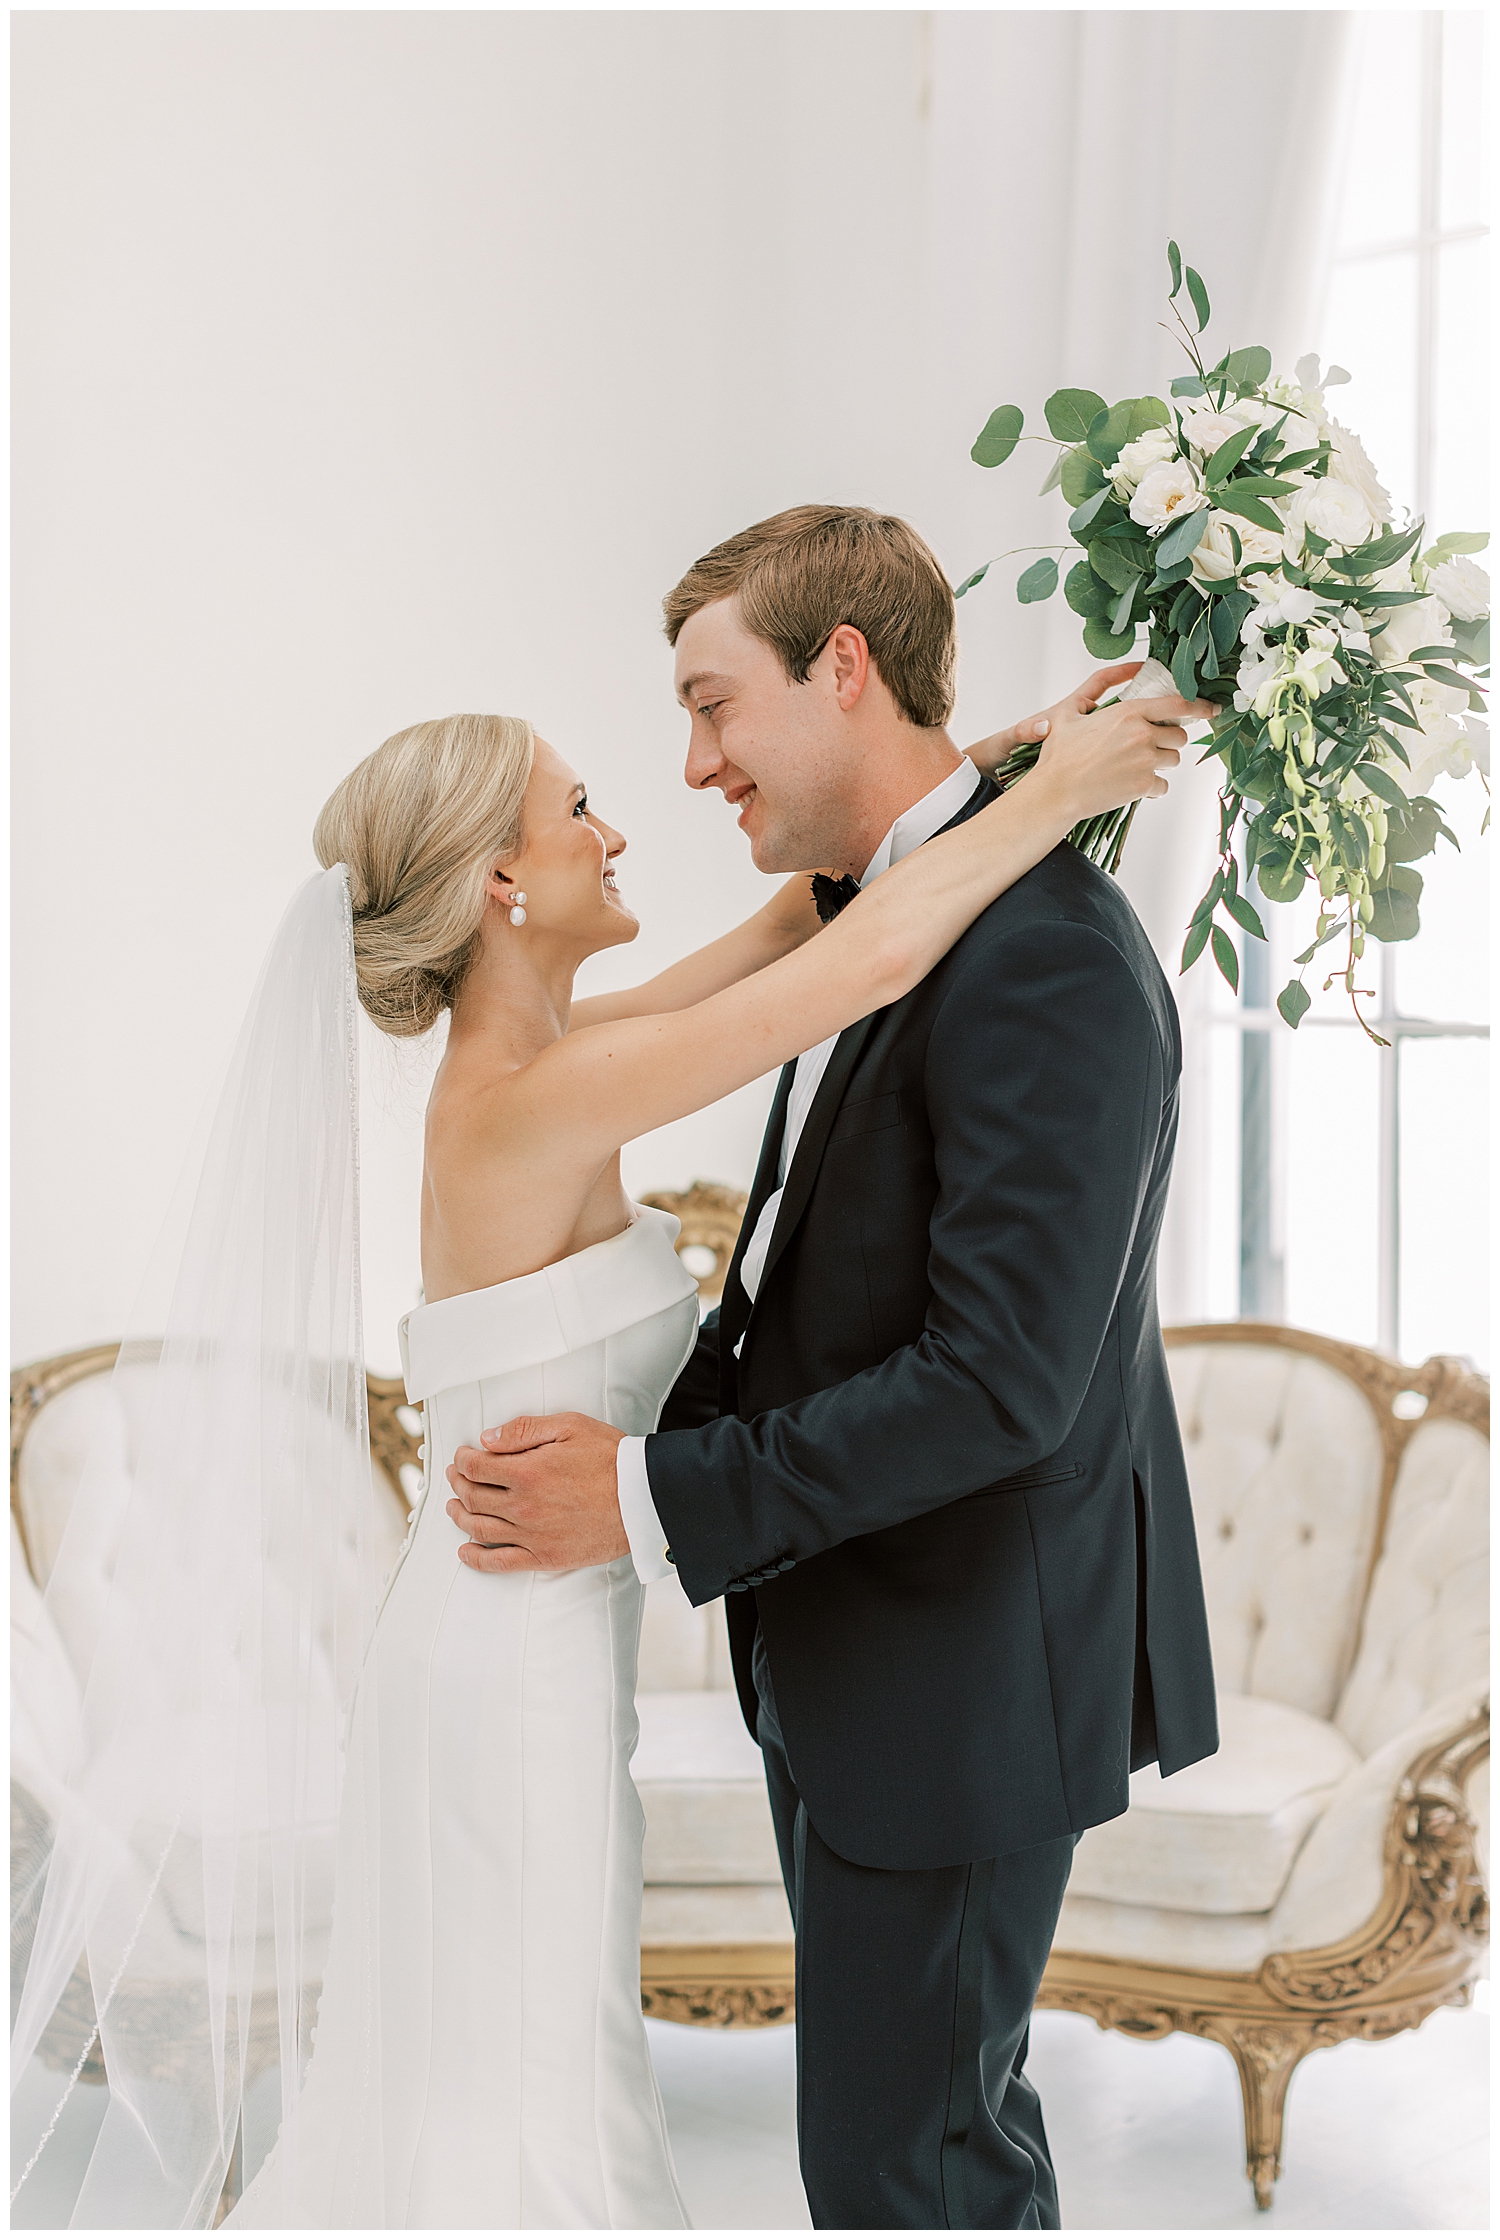 A bride and groom embrace each other in a white room.